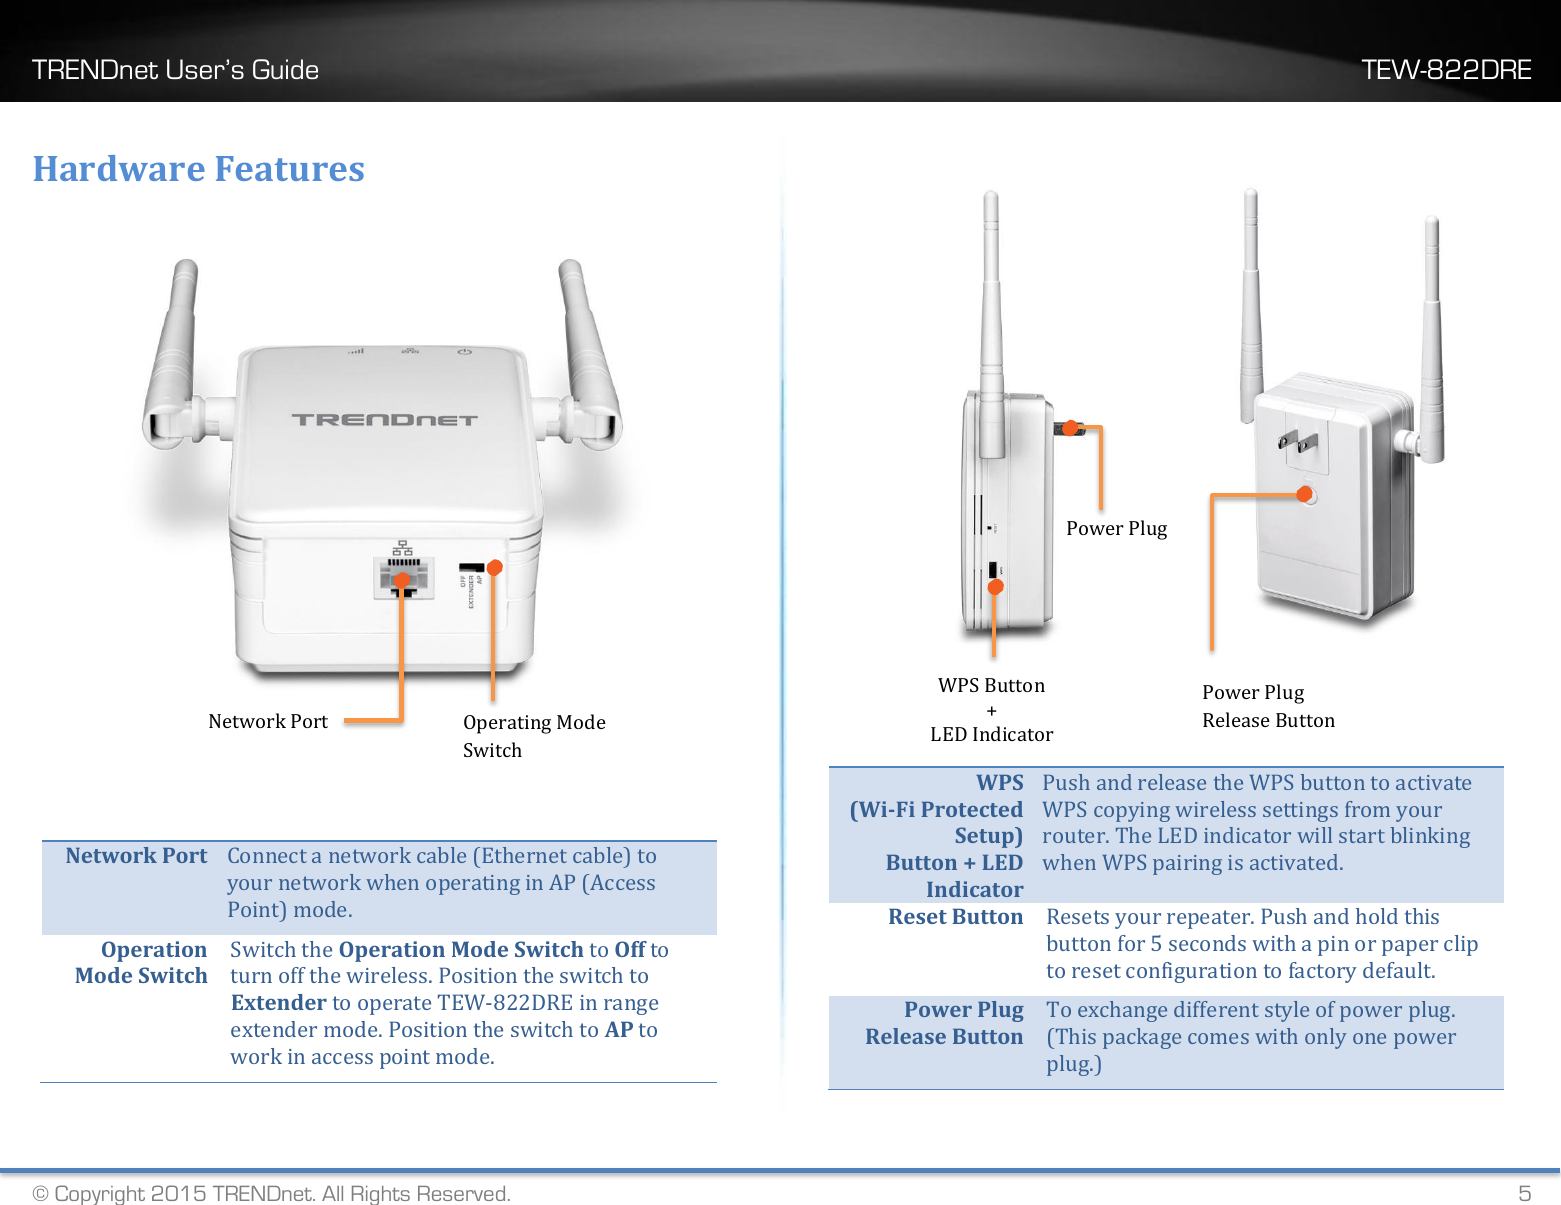 TRENDnet User’s Guide    TEW-822DRE © Copyright 2015 TRENDnet. All Rights Reserved.   5 Hardware Features    Network Port Connect a network cable (Ethernet cable) to your network when operating in AP (Access Point) mode. Operation Mode Switch Switch the Operation Mode Switch to Off to turn off the wireless. Position the switch to Extender to operate TEW-822DRE in range extender mode. Position the switch to AP to work in access point mode.             WPS (Wi-Fi Protected Setup) Button + LED Indicator Push and release the WPS button to activate WPS copying wireless settings from your router. The LED indicator will start blinking when WPS pairing is activated. Reset Button Resets your repeater. Push and hold this button for 5 seconds with a pin or paper clip to reset configuration to factory default. Power Plug Release Button To exchange different style of power plug. (This package comes with only one power plug.)  Operating Mode Switch Network Port WPS Button + LED Indicator Adjustable Antenna Power Plug Power Plug Release Button 